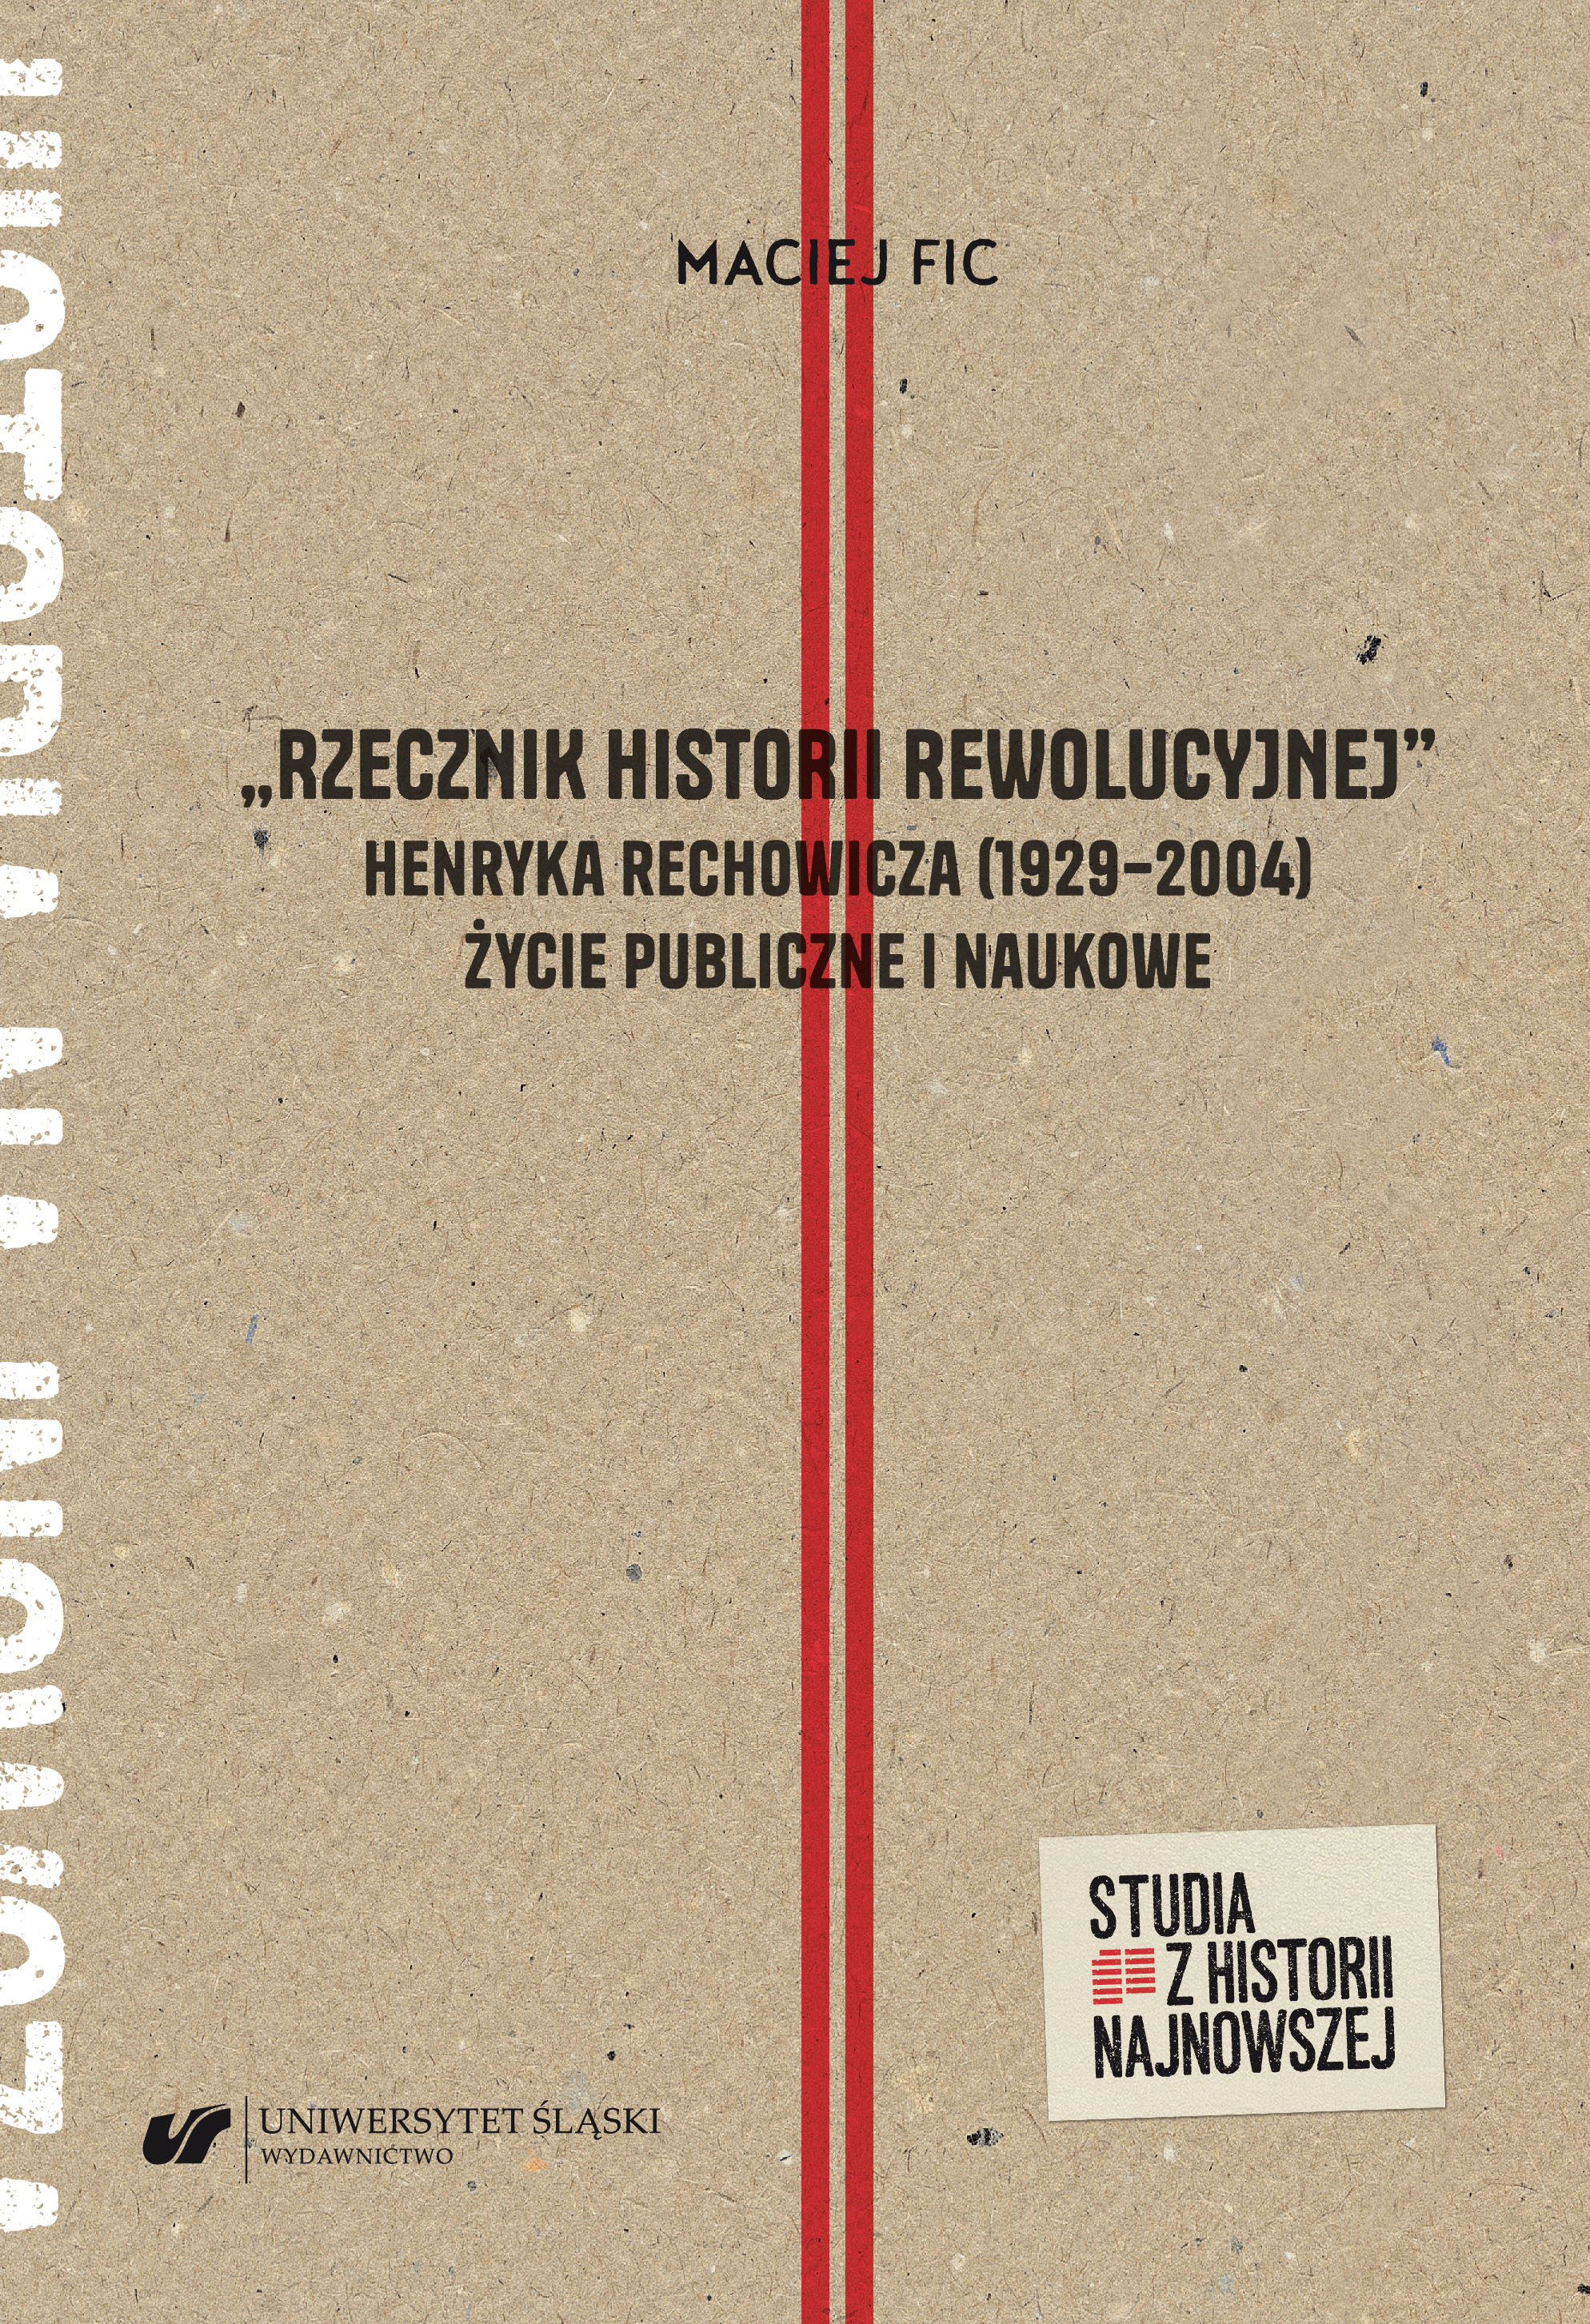 “Advocate of revolutionary history”. Henryk Rechowicz’s (1929–2004) public and scientific life